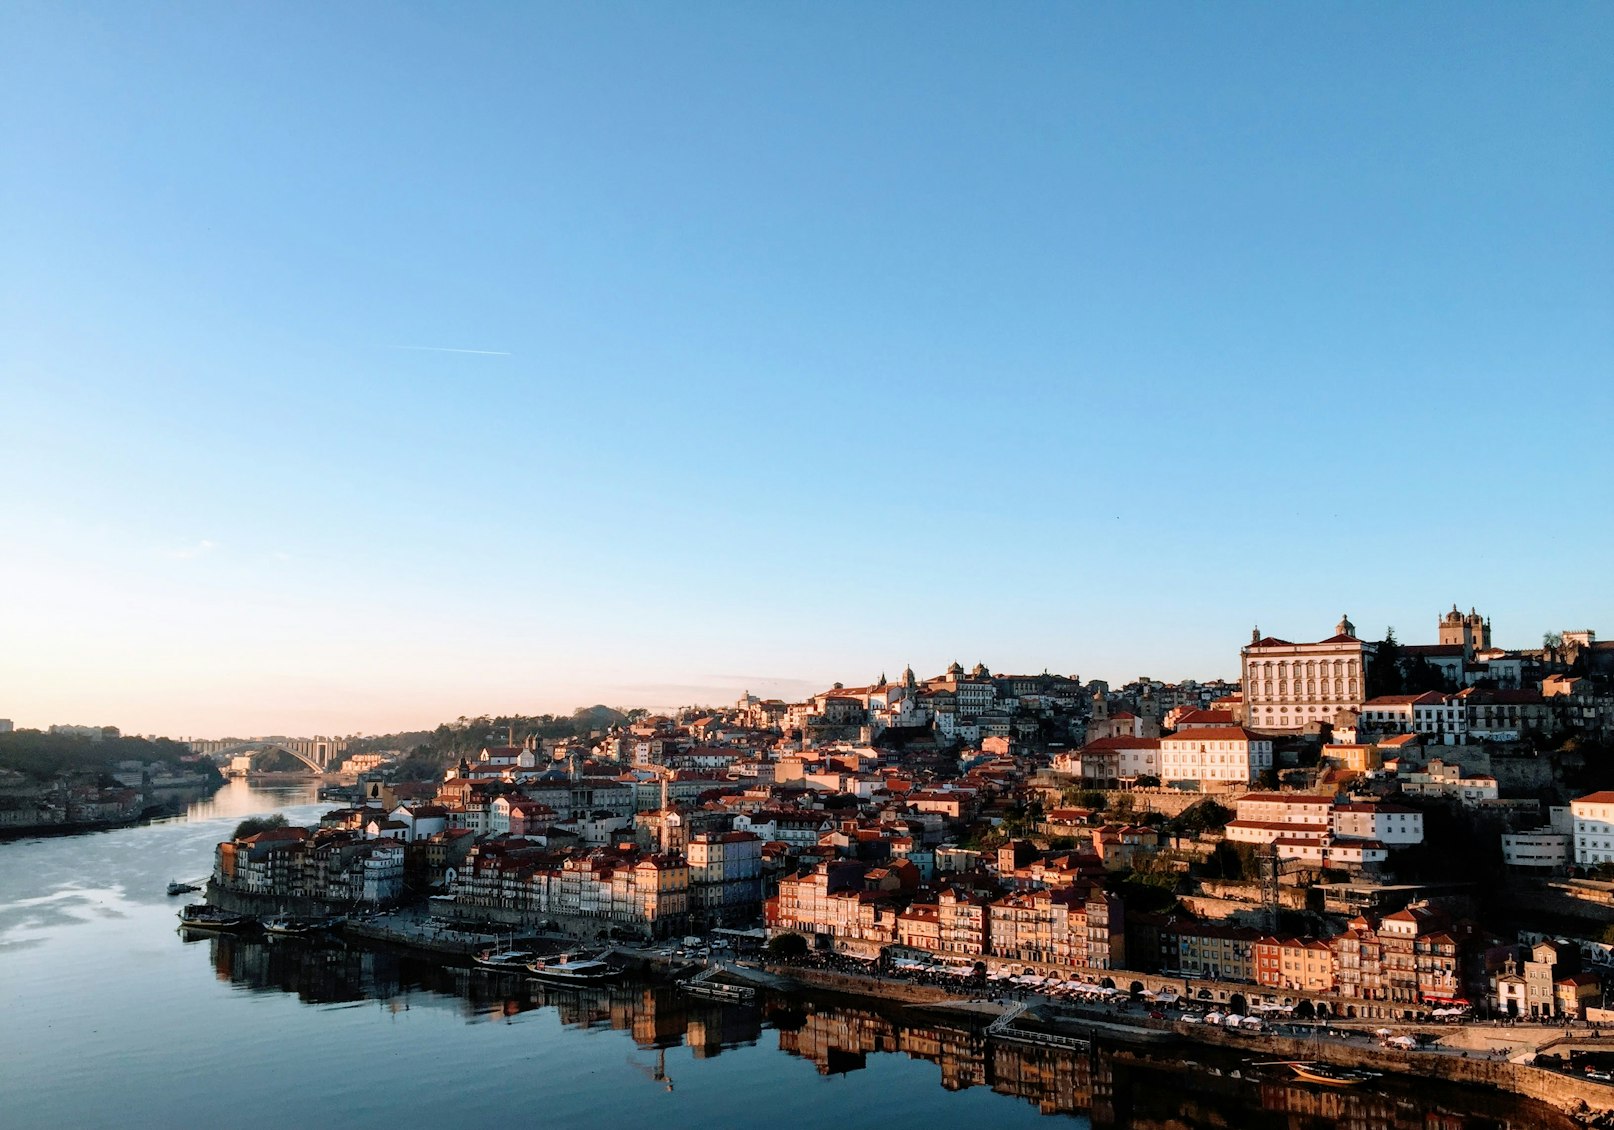 Quintessential Portuguese fishing town at sunset